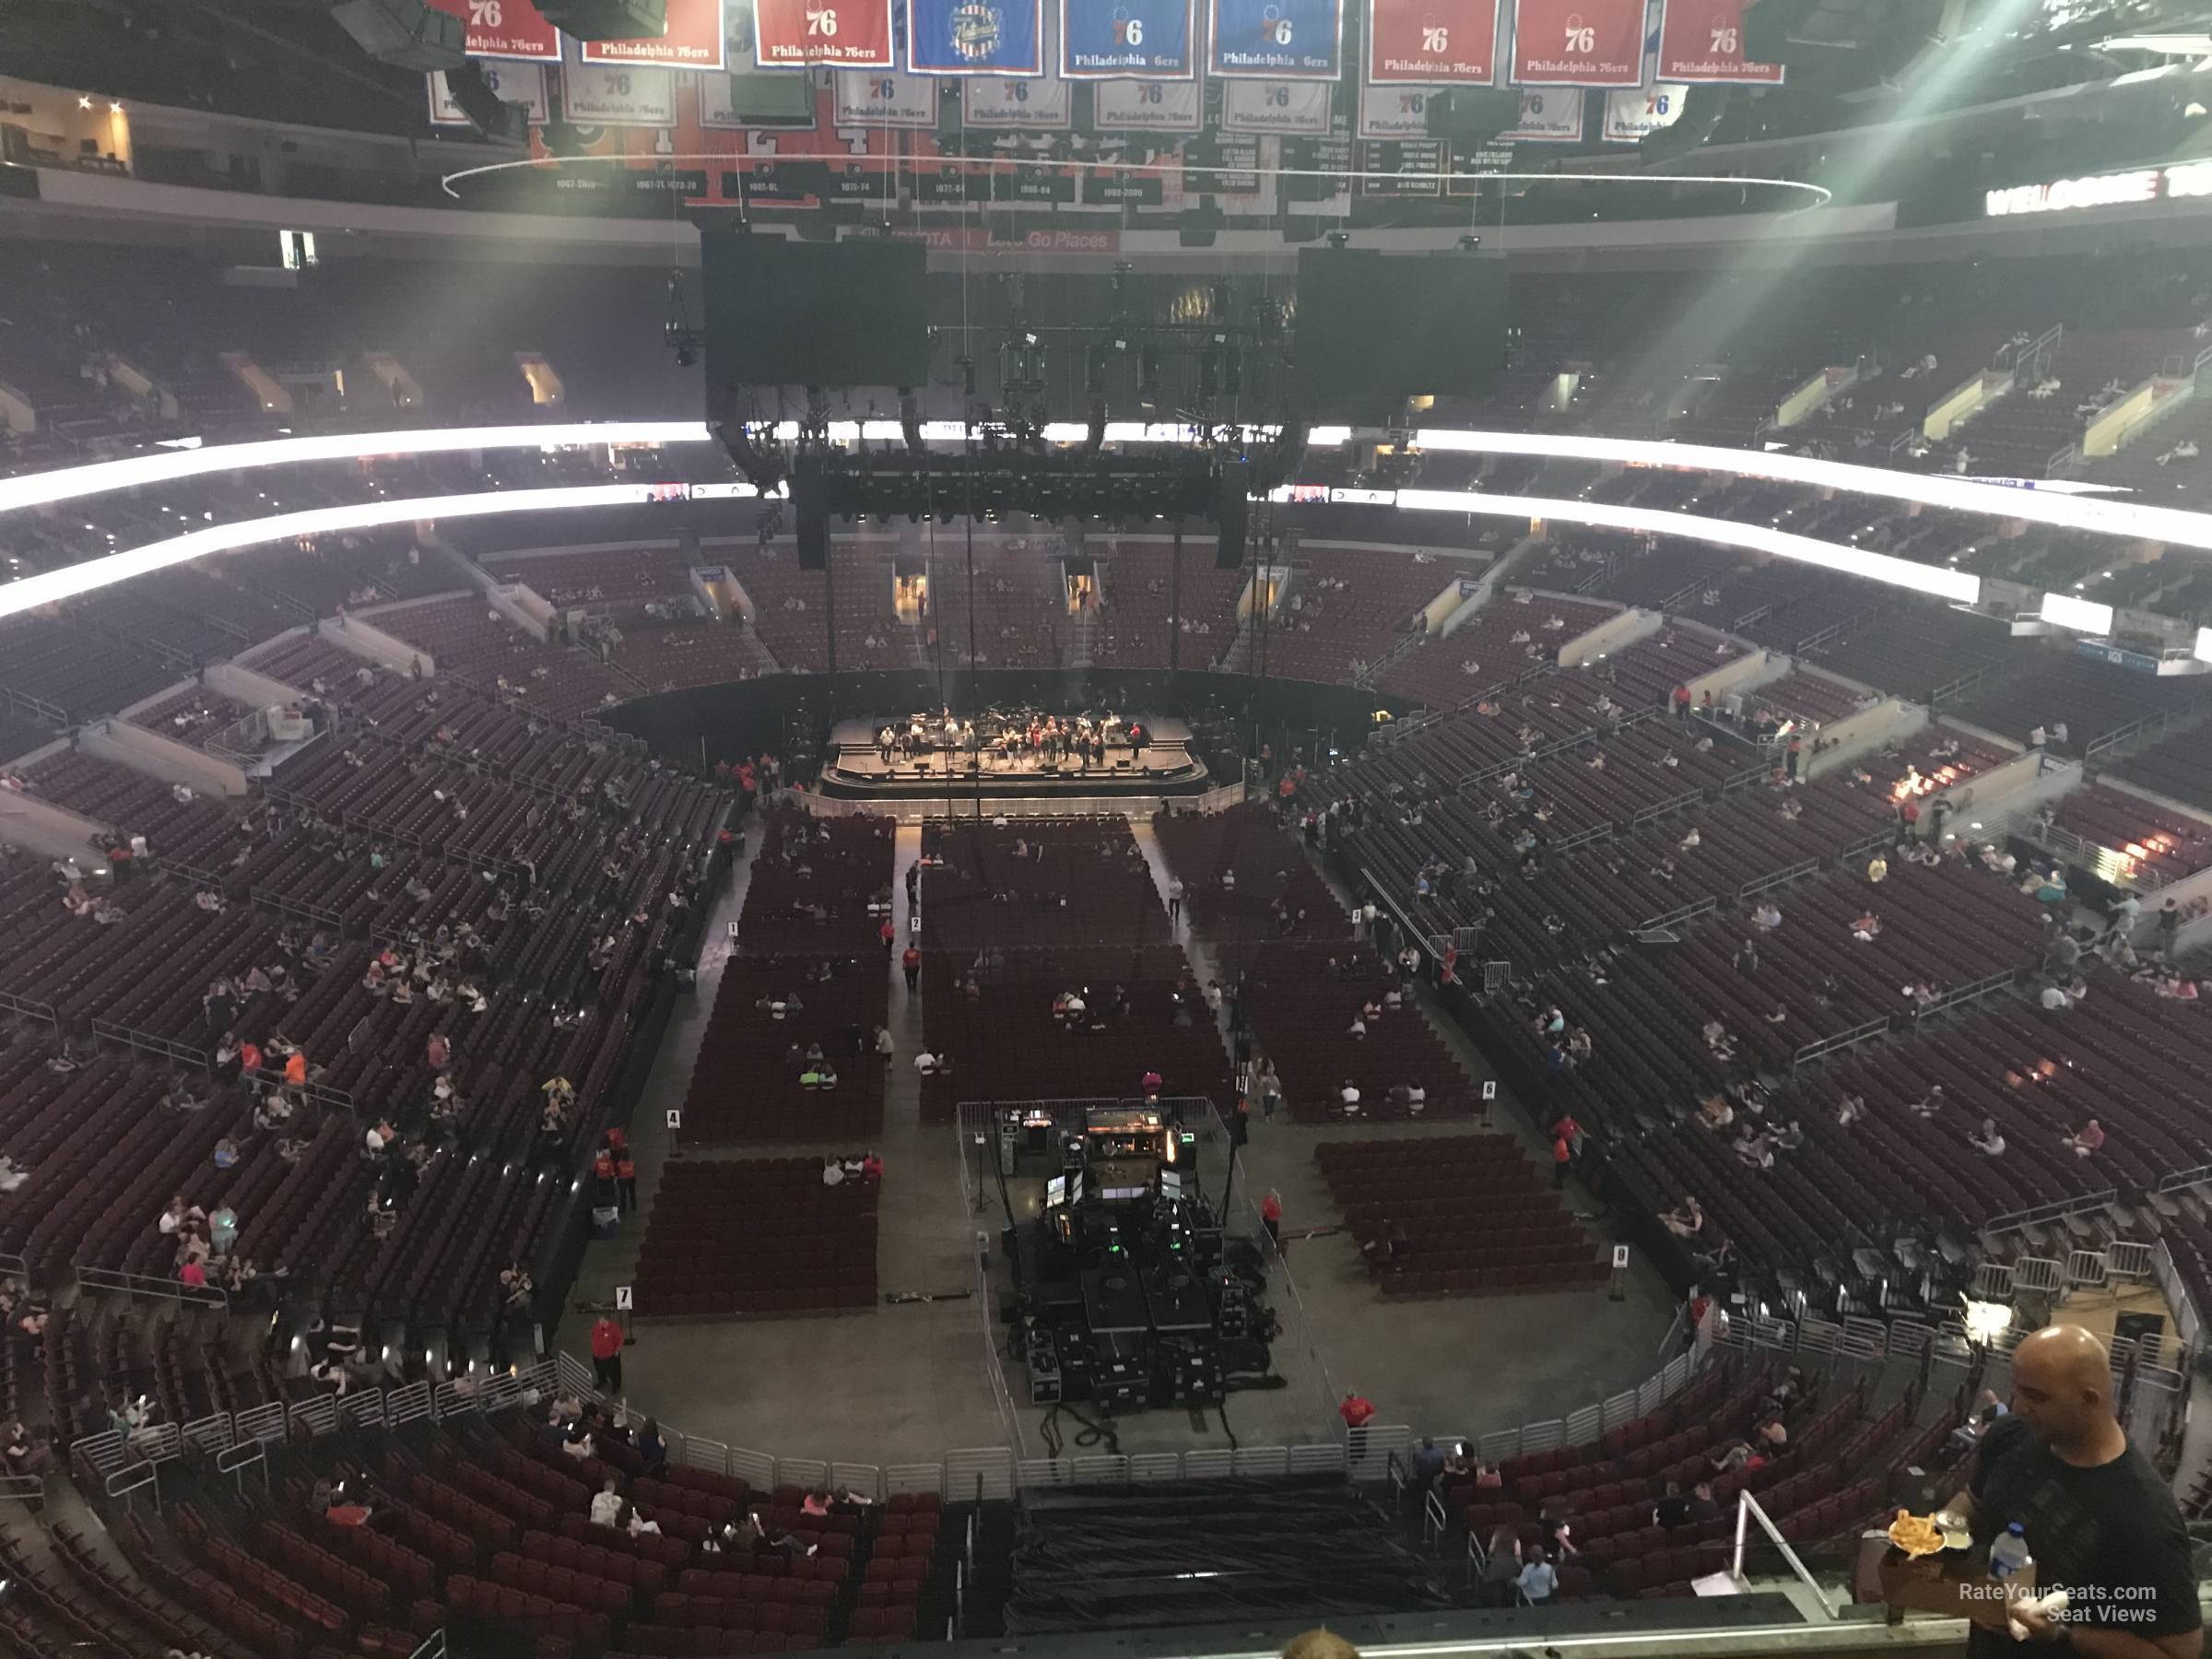 Section 207 at Wells Fargo Center for Concerts